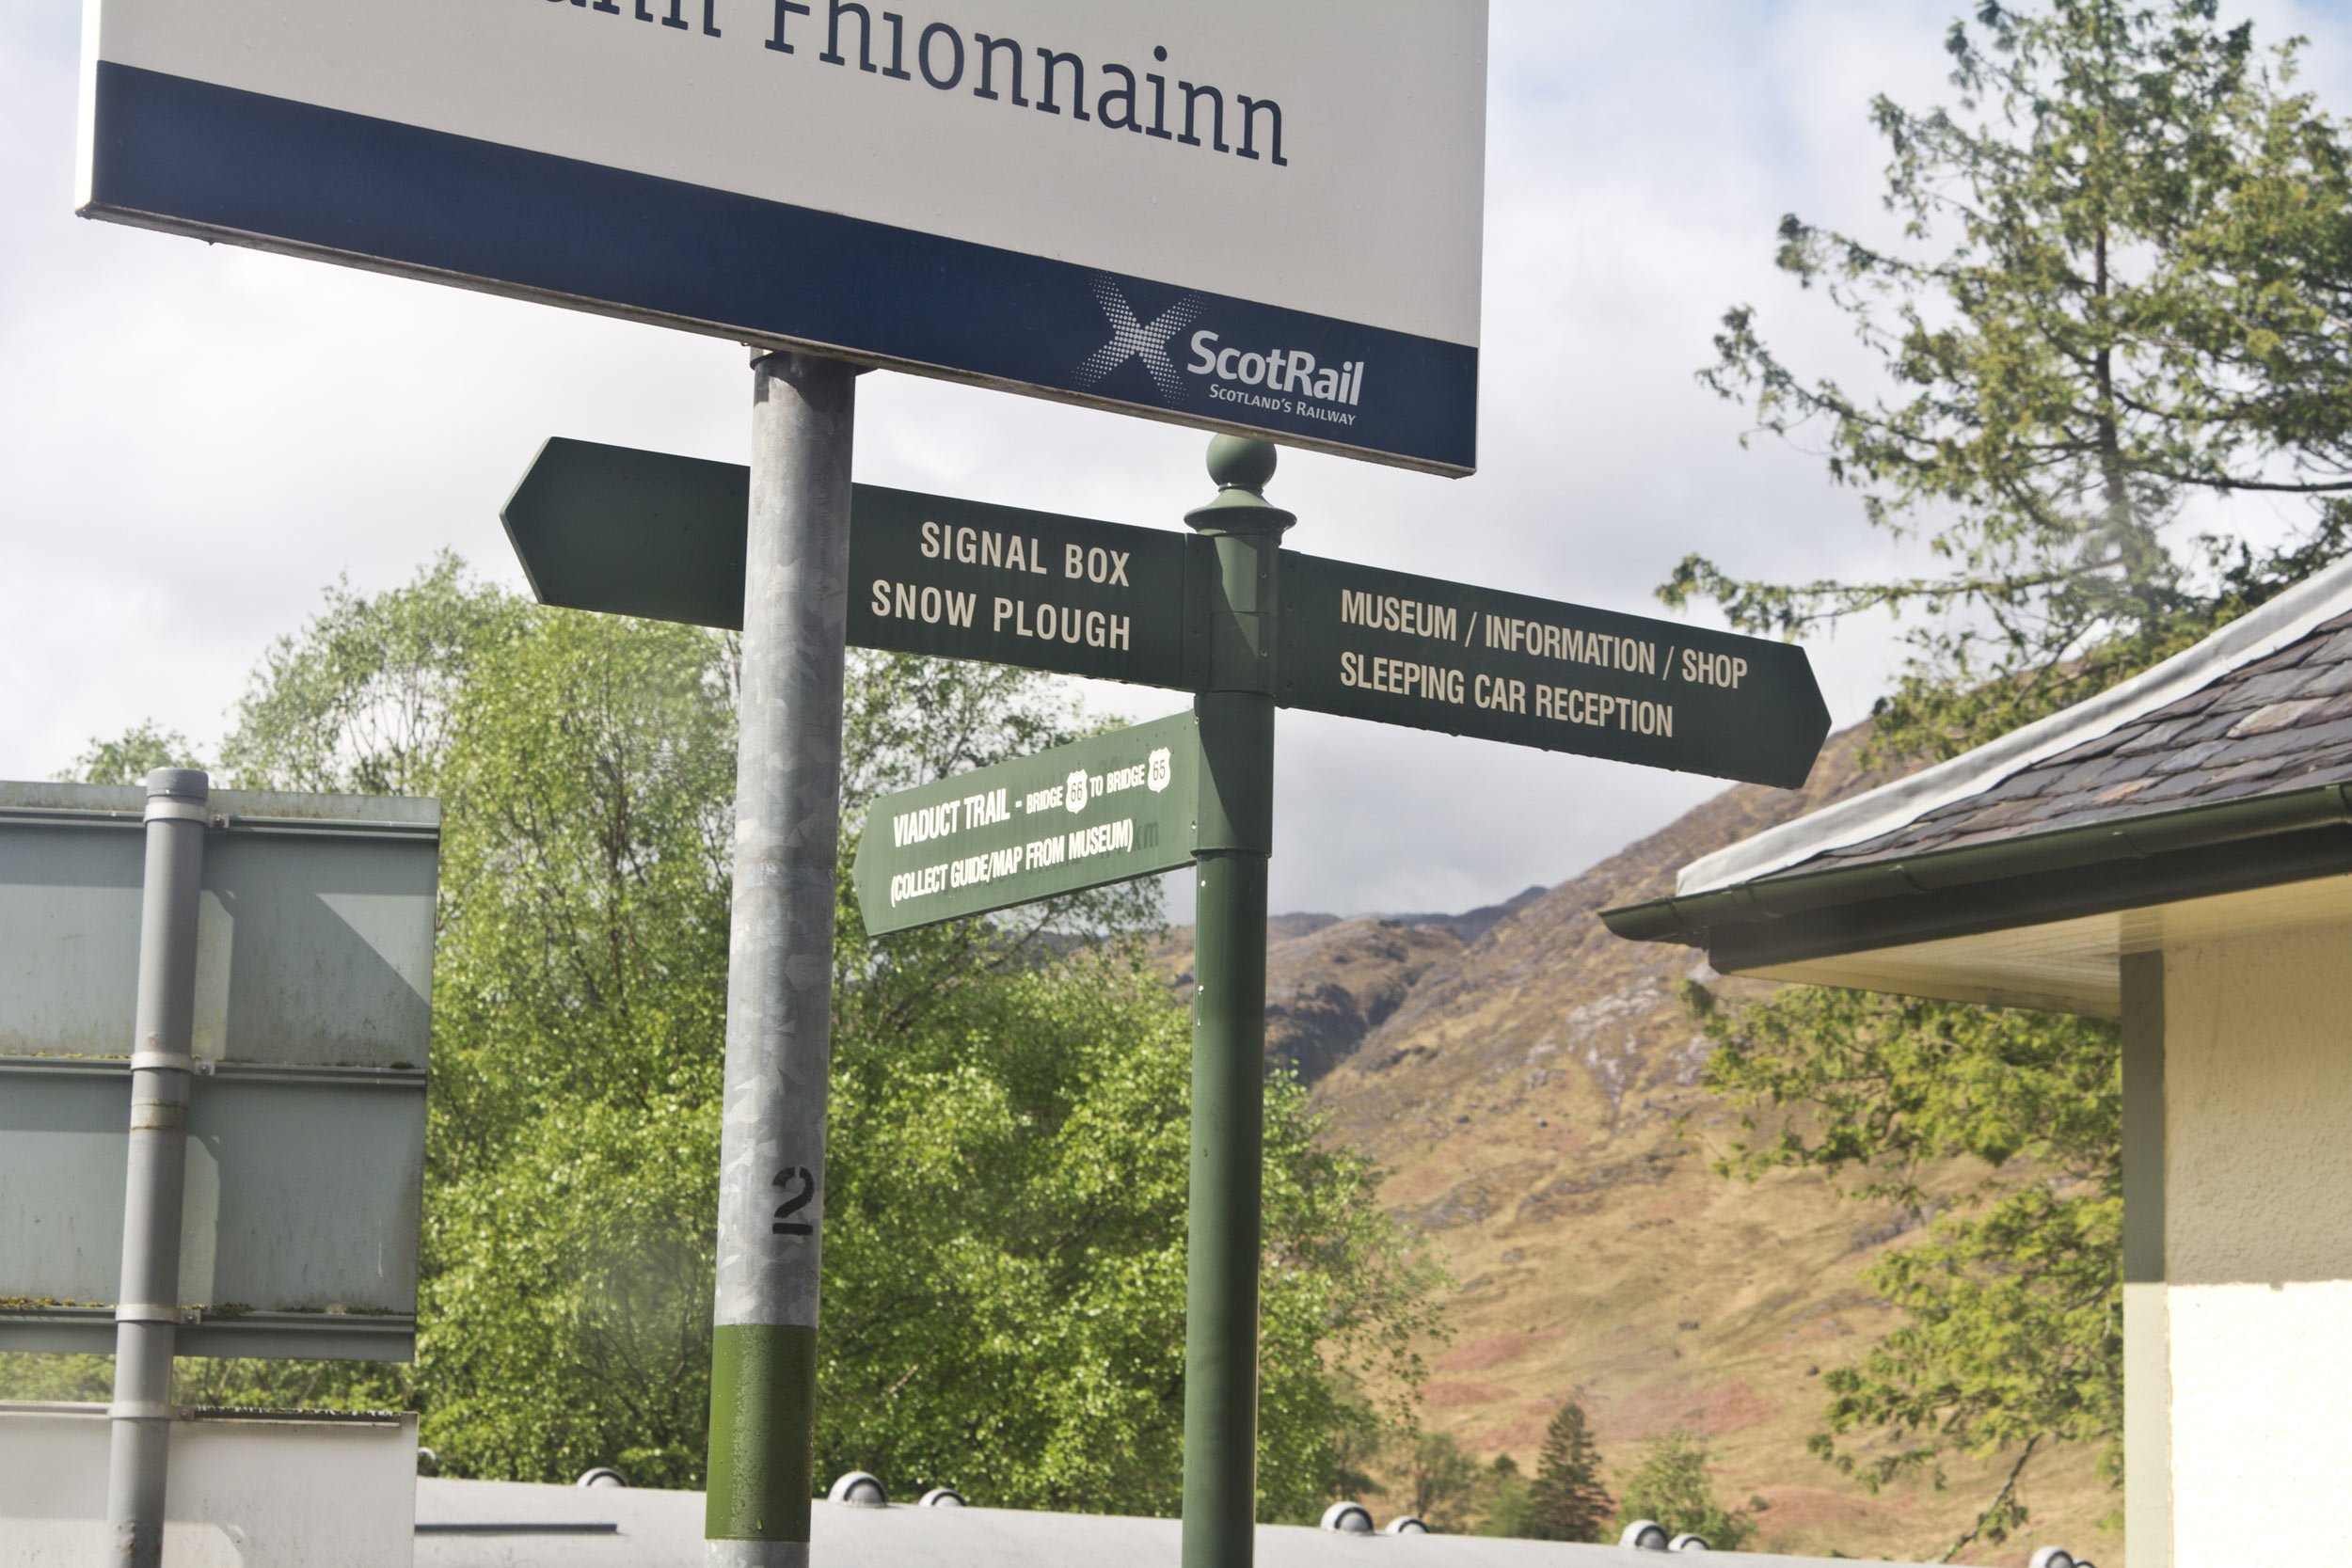 signs-for-walking-trail-at-glenfinnan-station